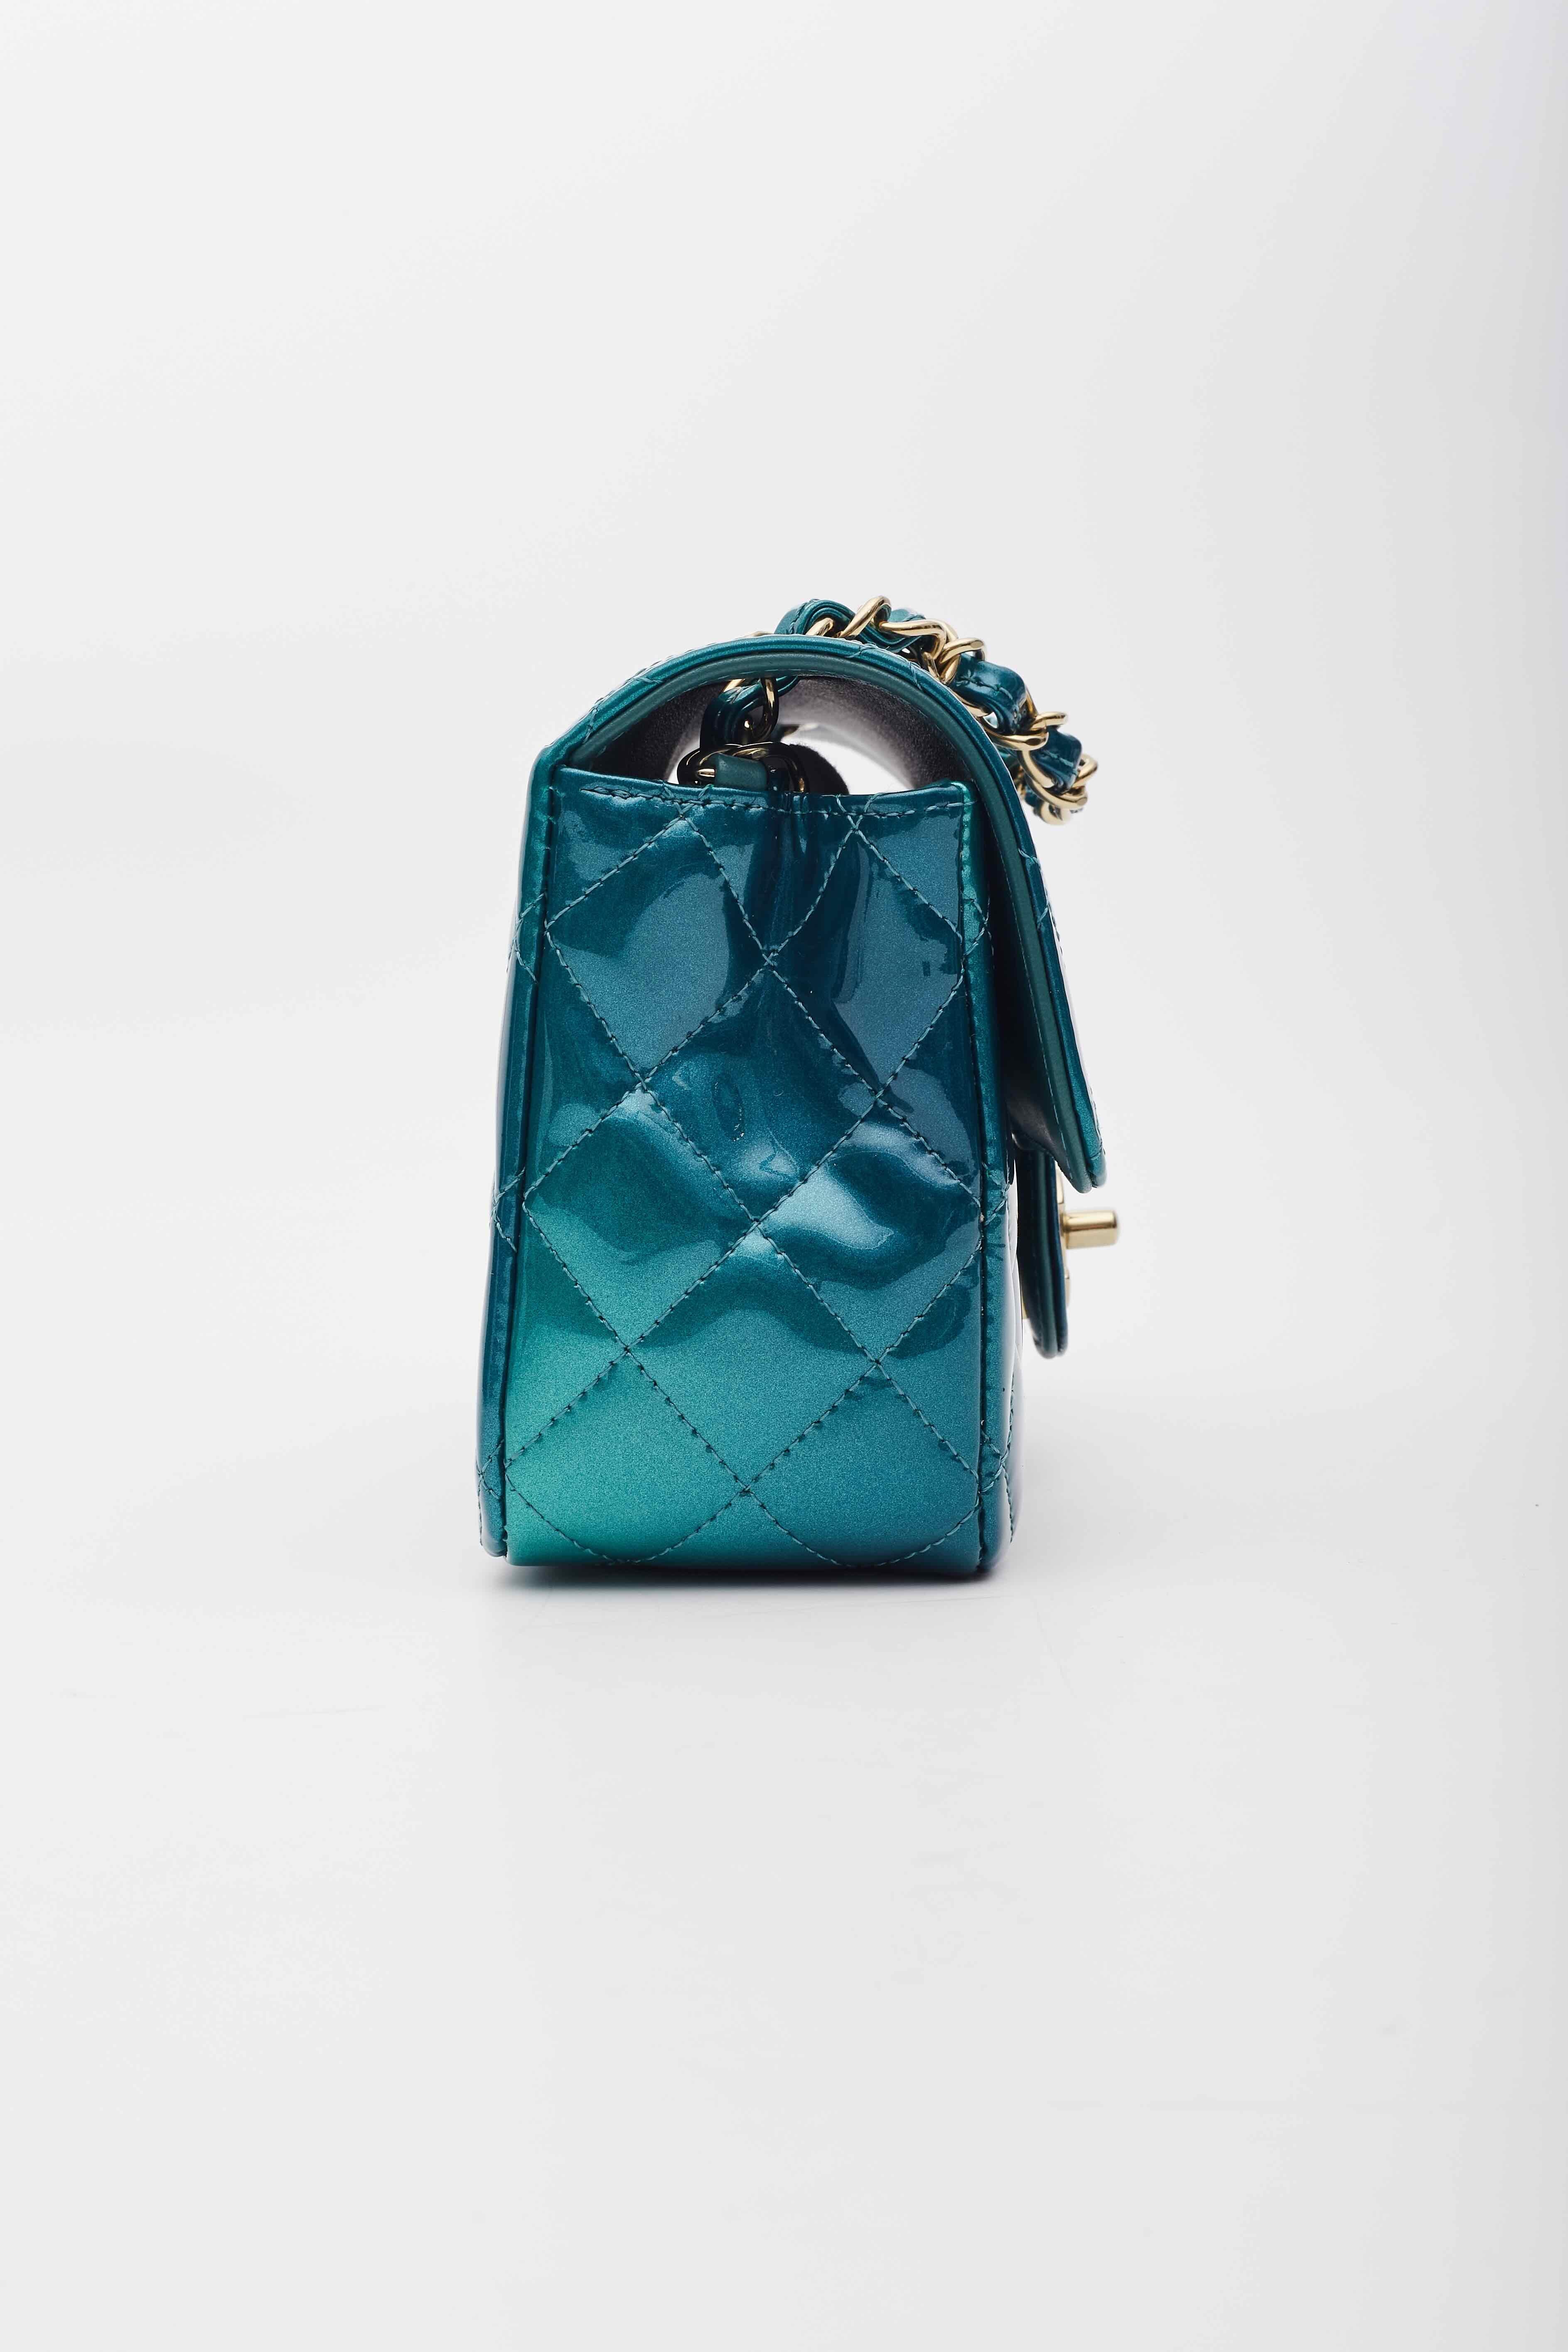 Chanel Patent Calfskin Mini Rectangular Flap Green Blue XS In Excellent Condition For Sale In Montreal, Quebec